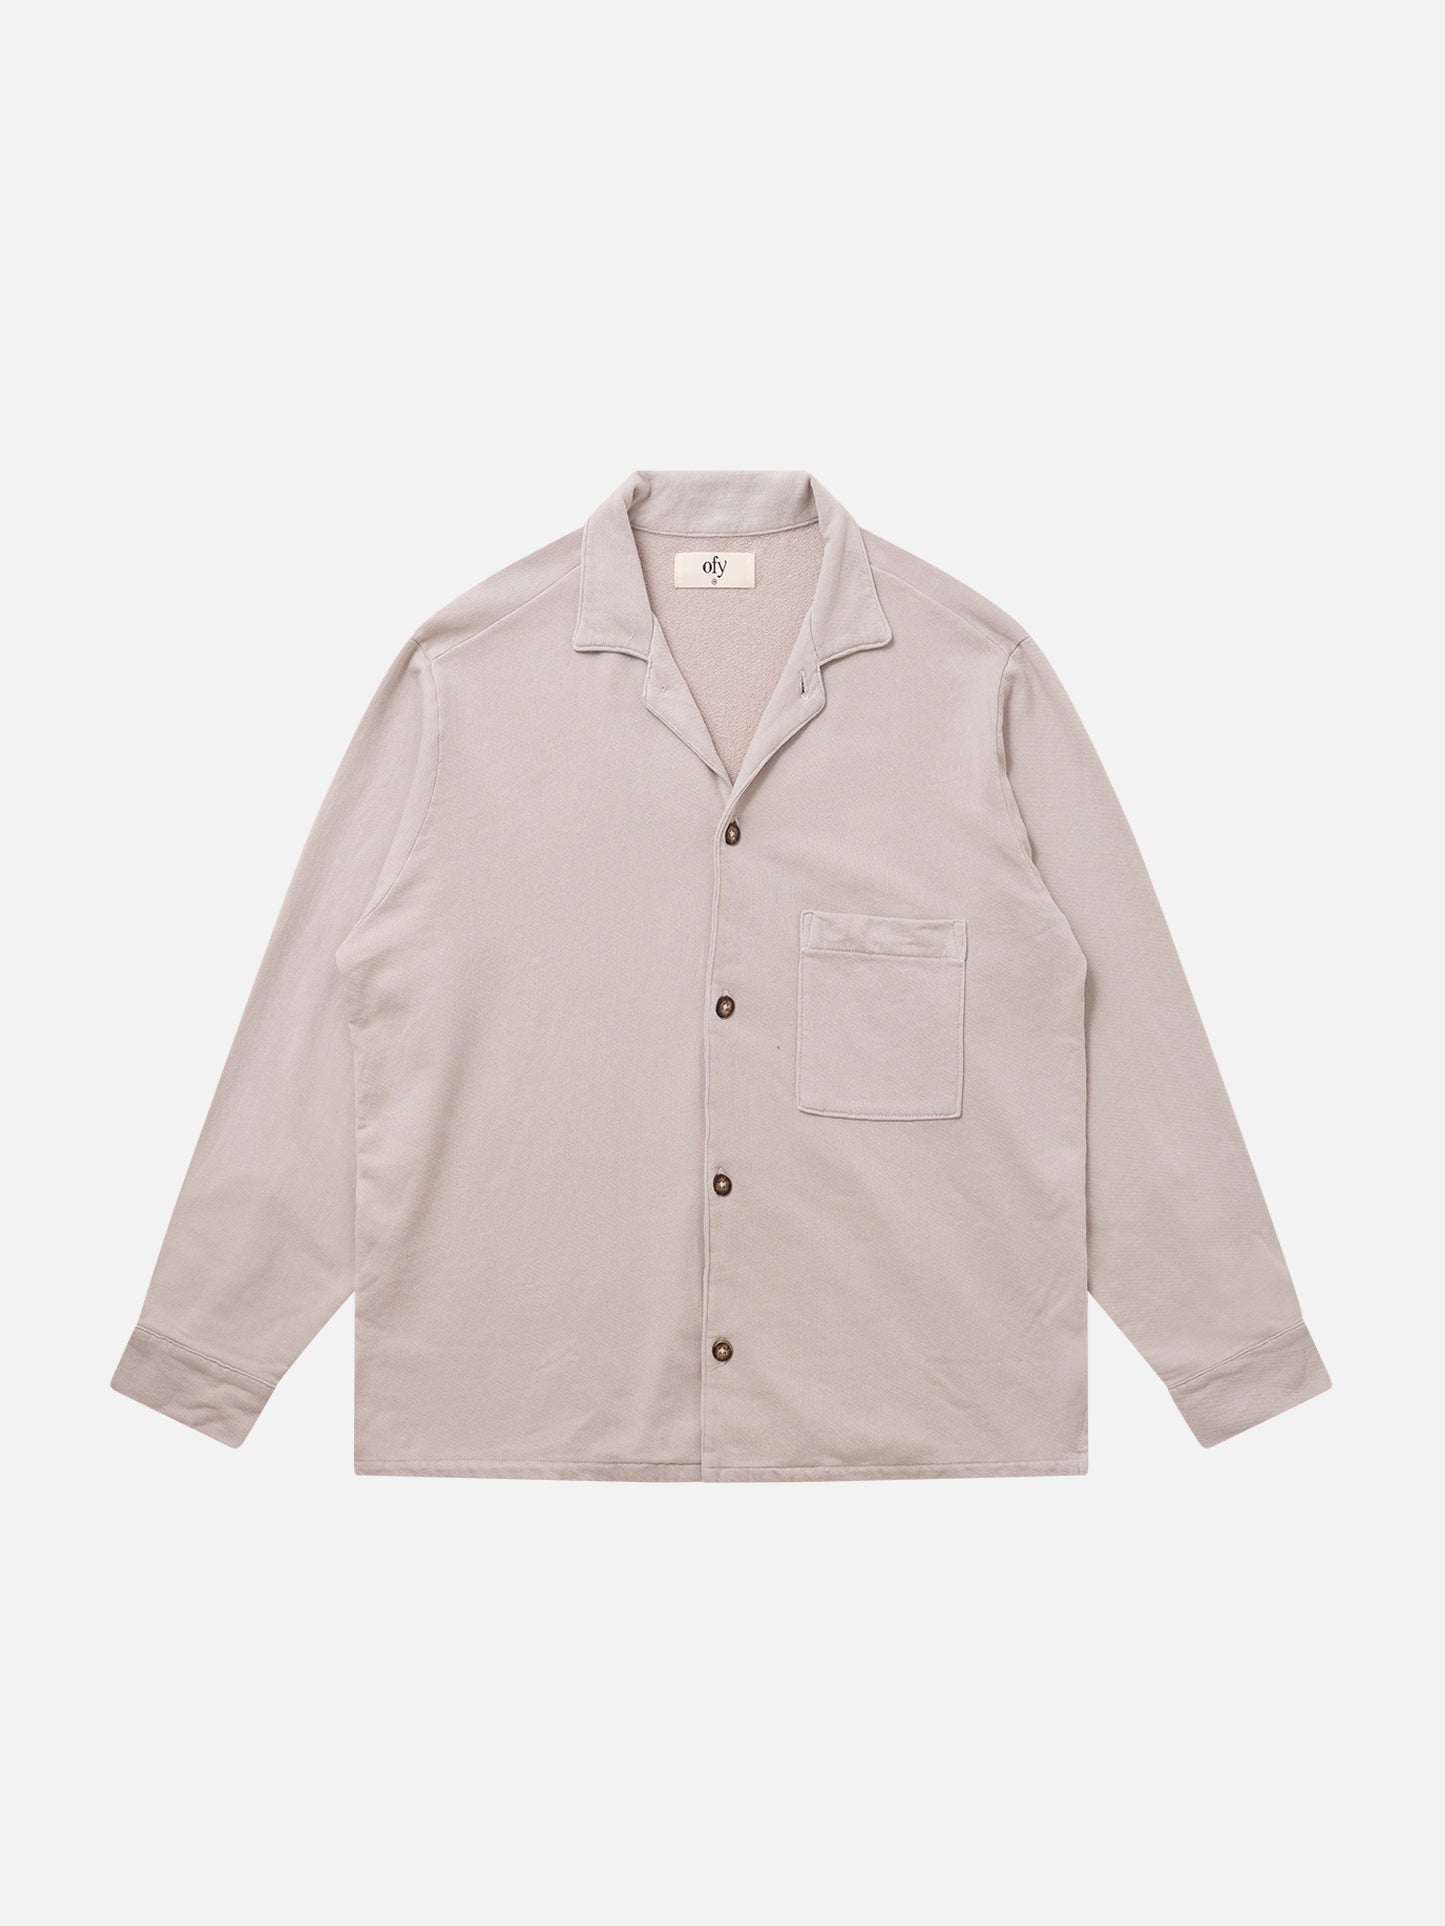 Terry Linen L/S - Island Fossil